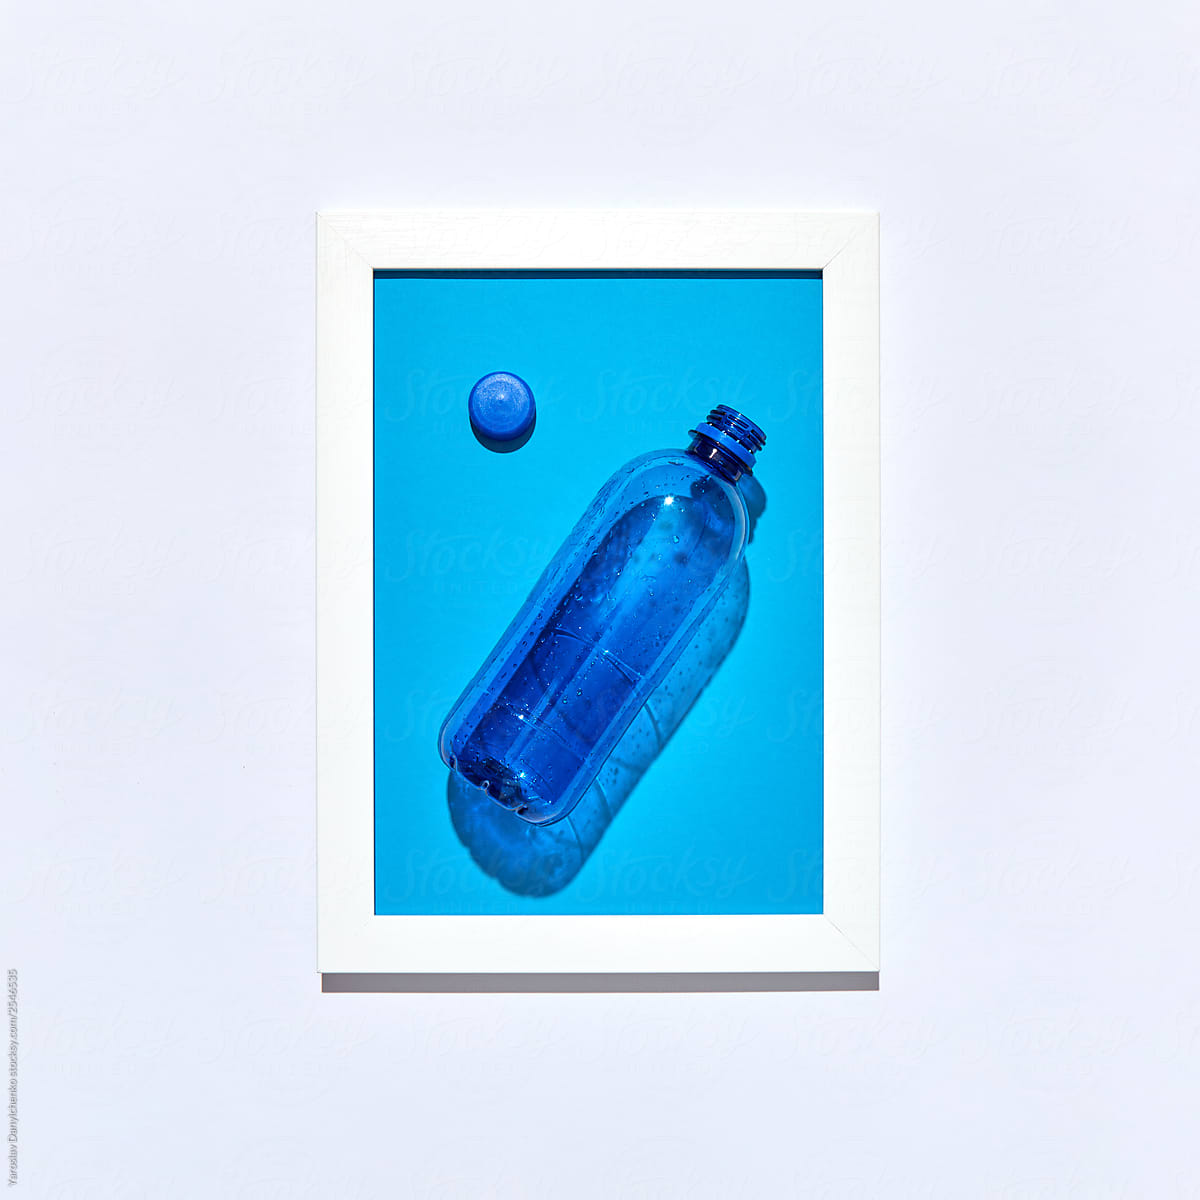 Plastic bottle with a cap in a frame on a light background.